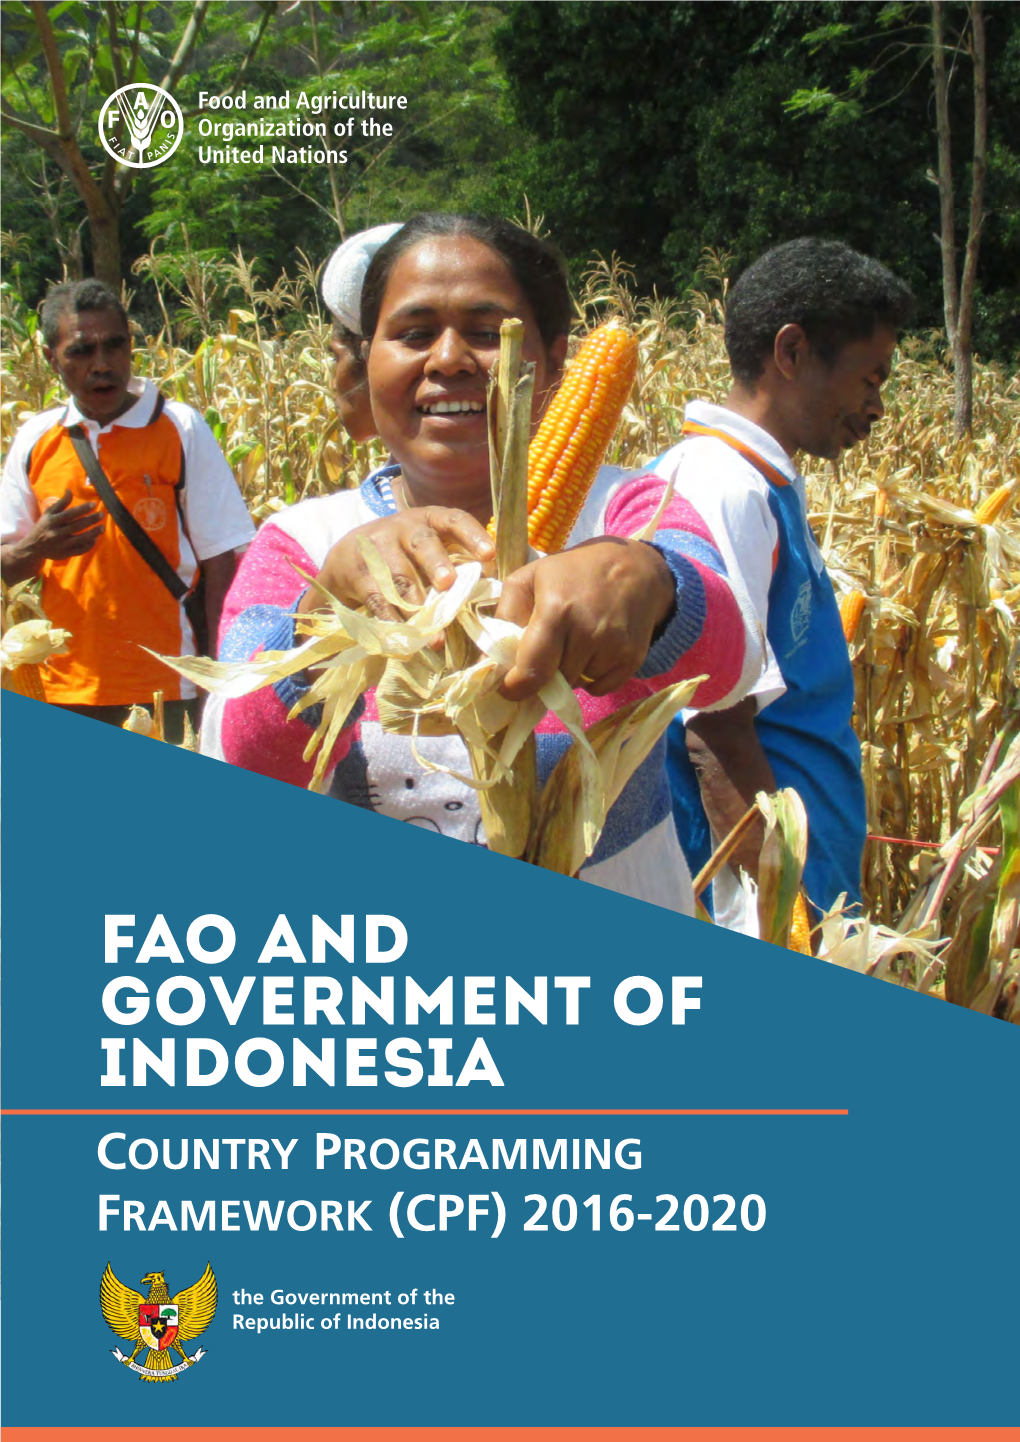 FAO and GOVERNMENT of INDONESIA COUNTRY PROGRAMMING FRAMEWORK (CPF) 2016-2020